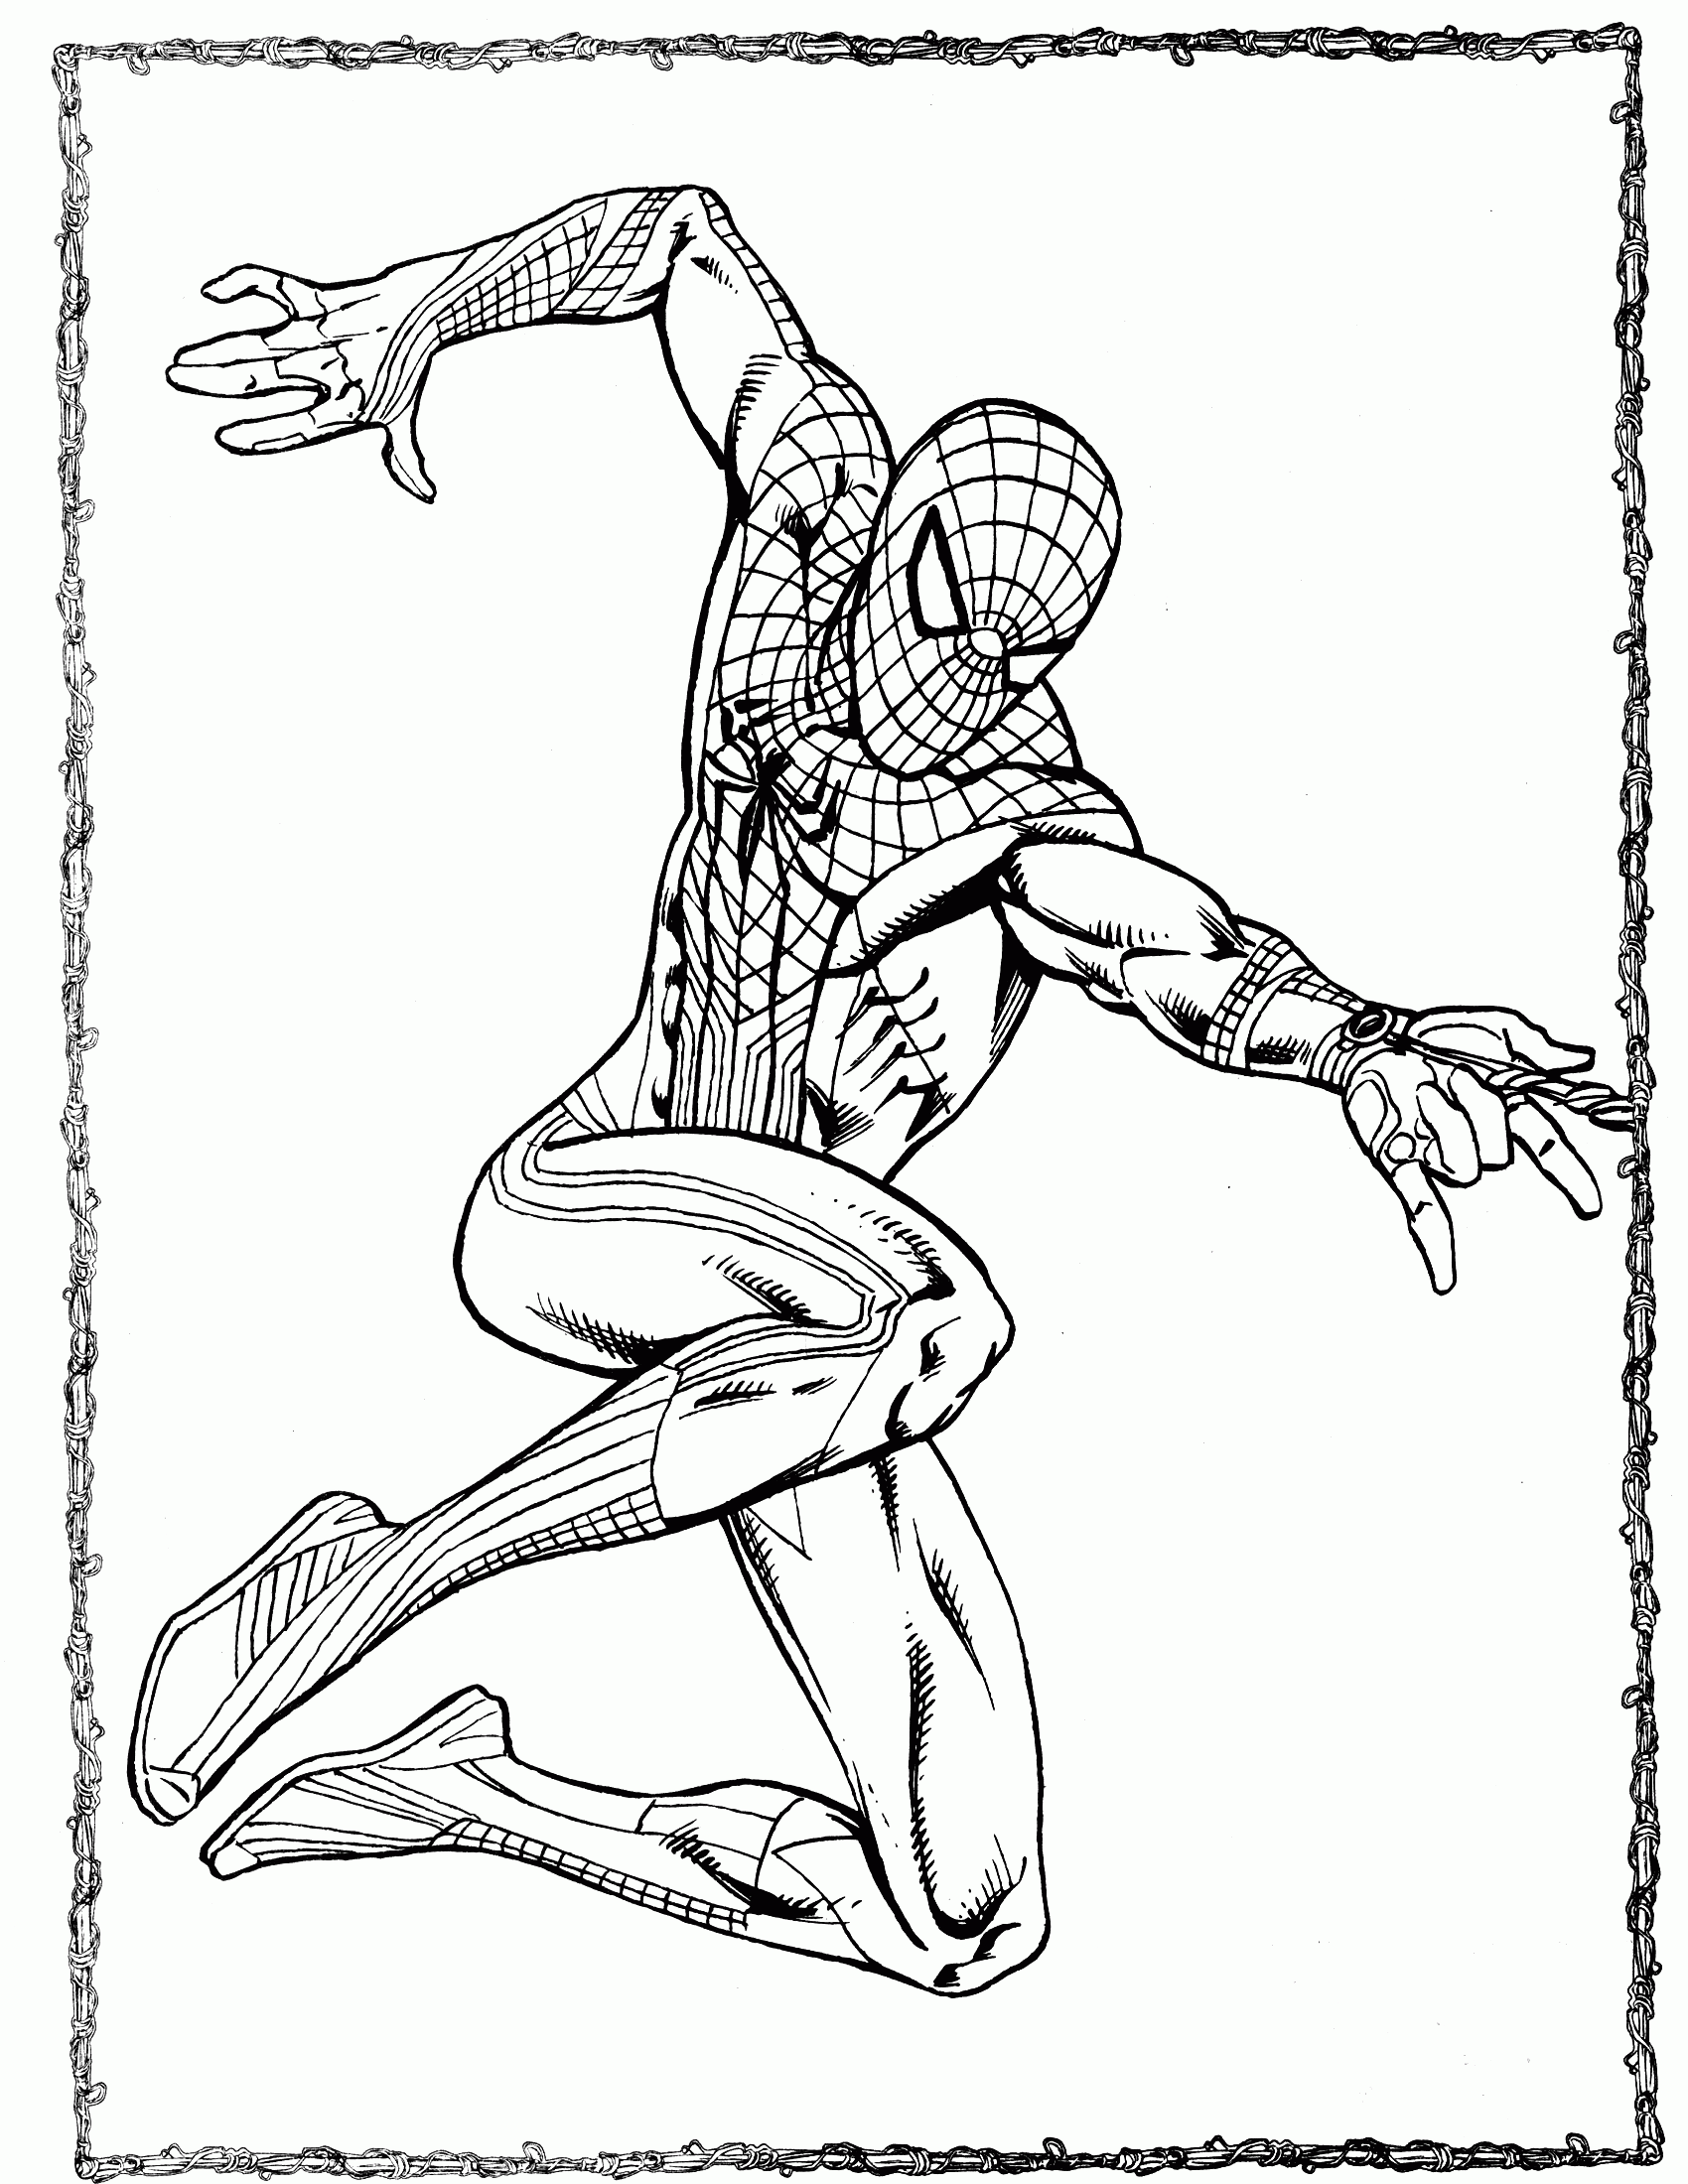 Ps4 Spider Man Coloring Pages Coloring Pages